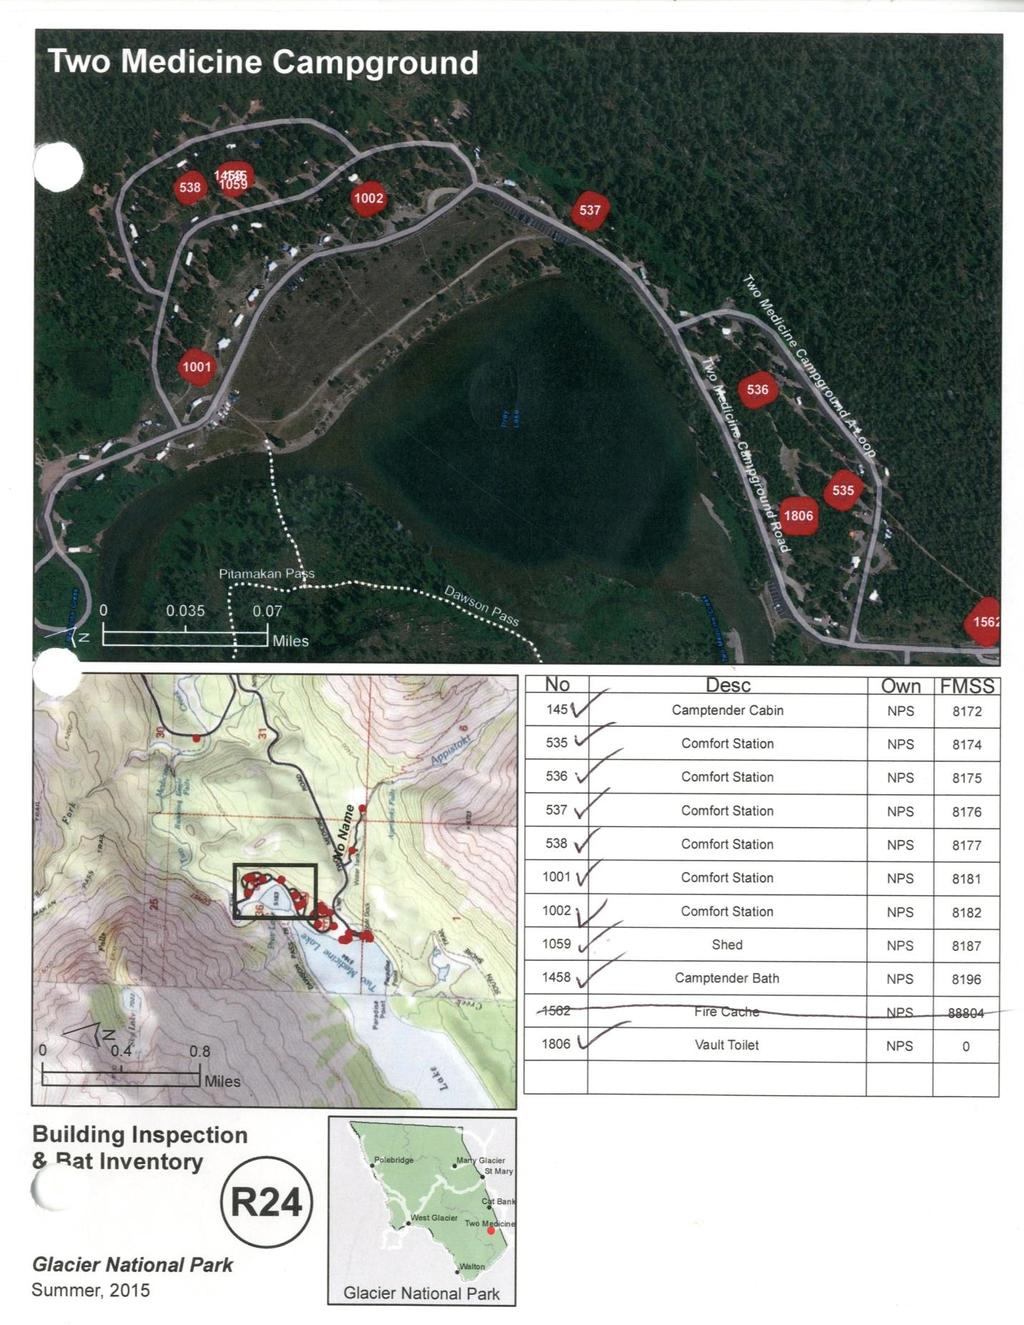 Figure 2: Example of a map used for building inspections provided by Glacier National